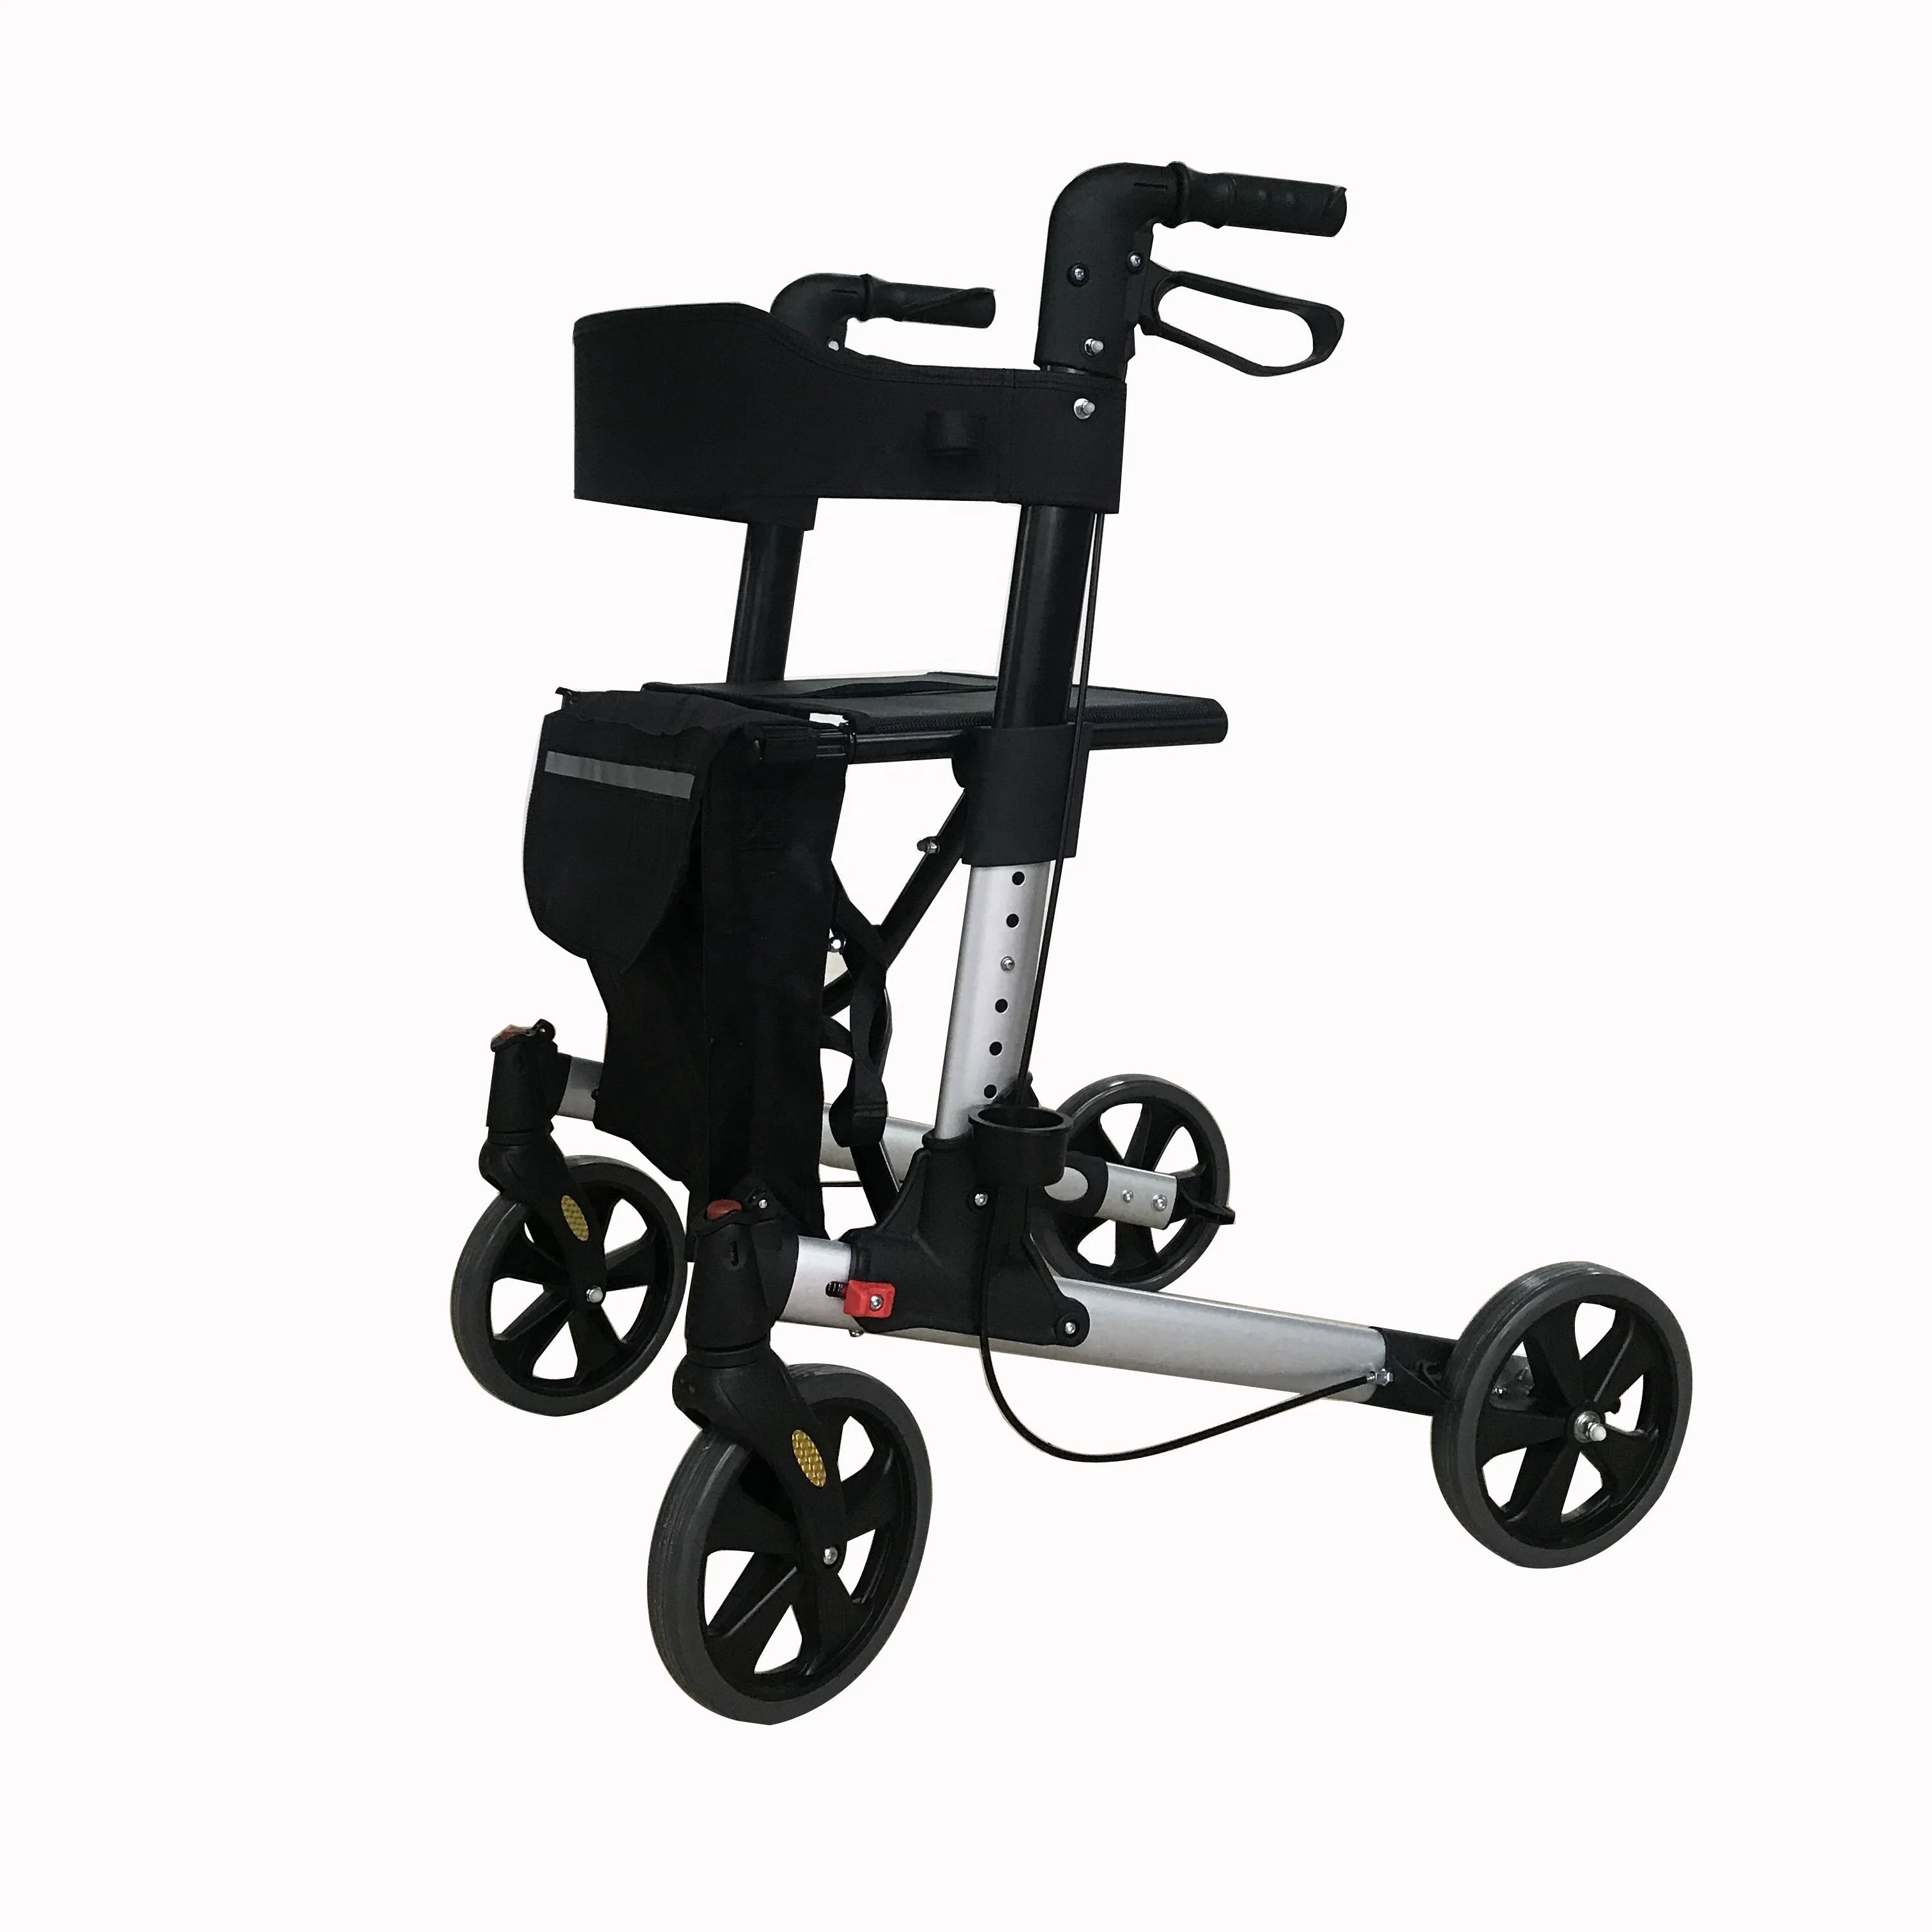 mobility aids